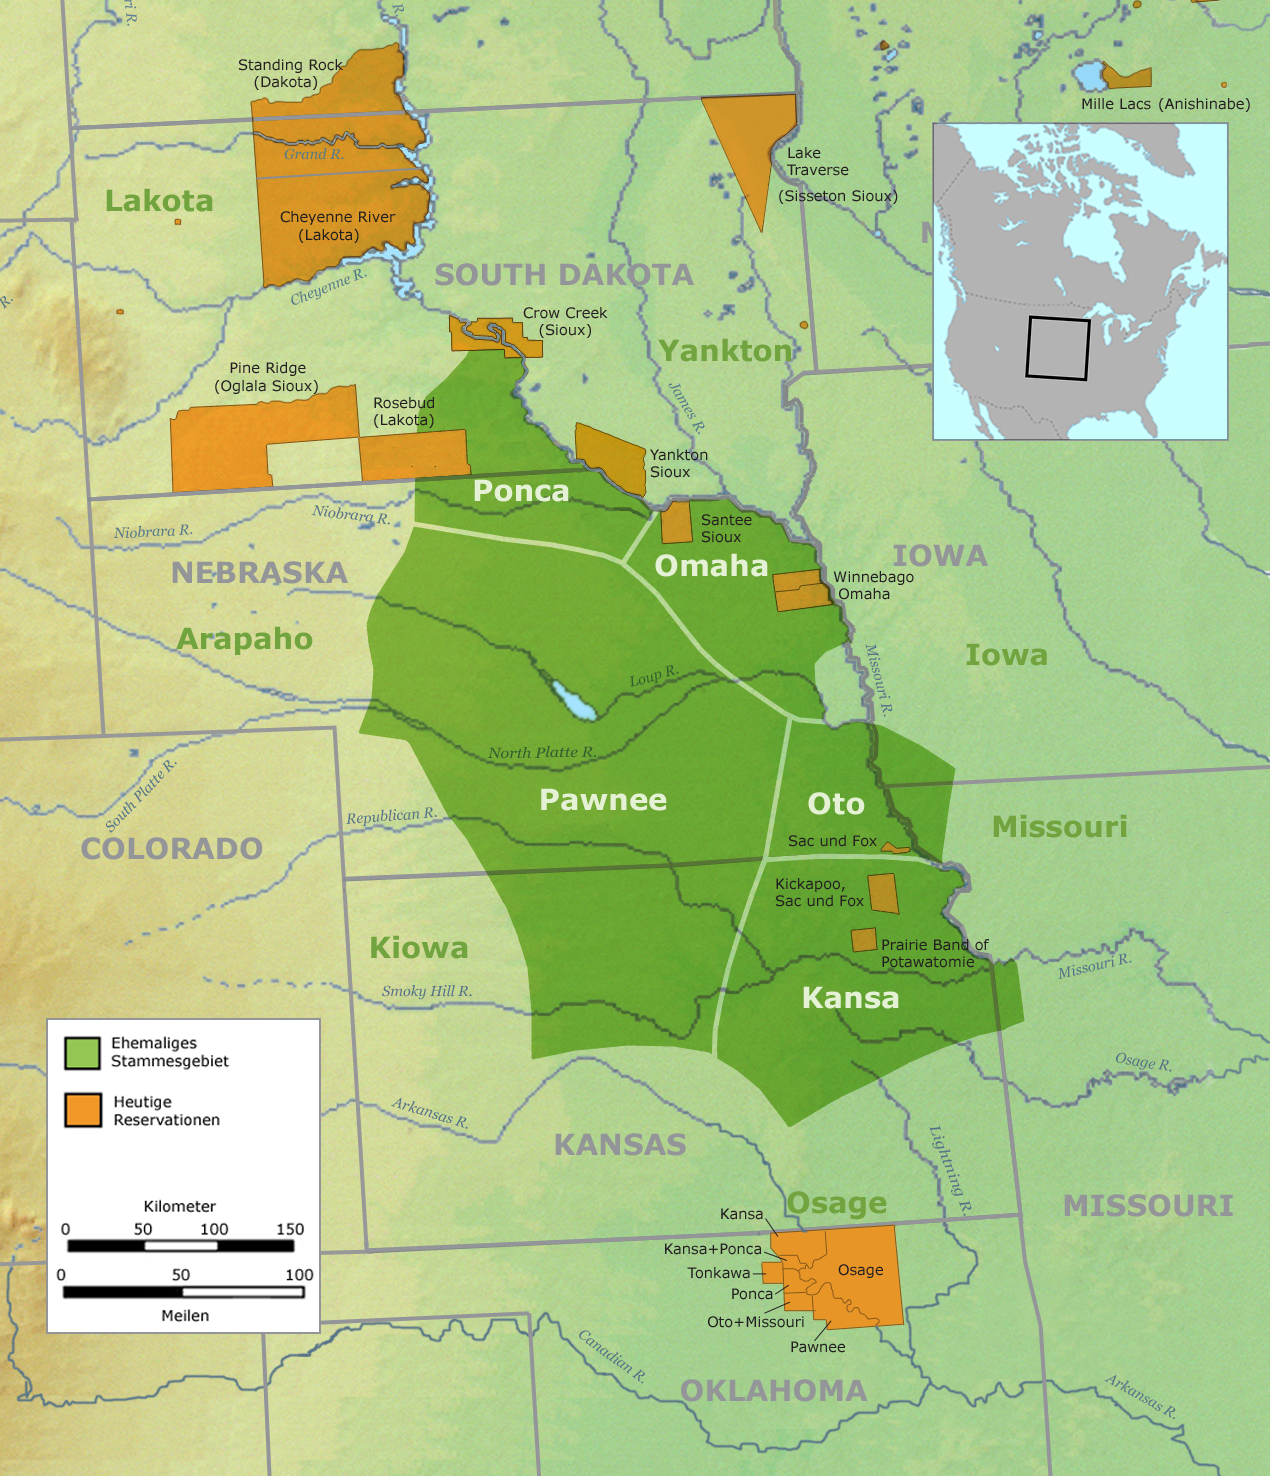 Geography of the Great Plains